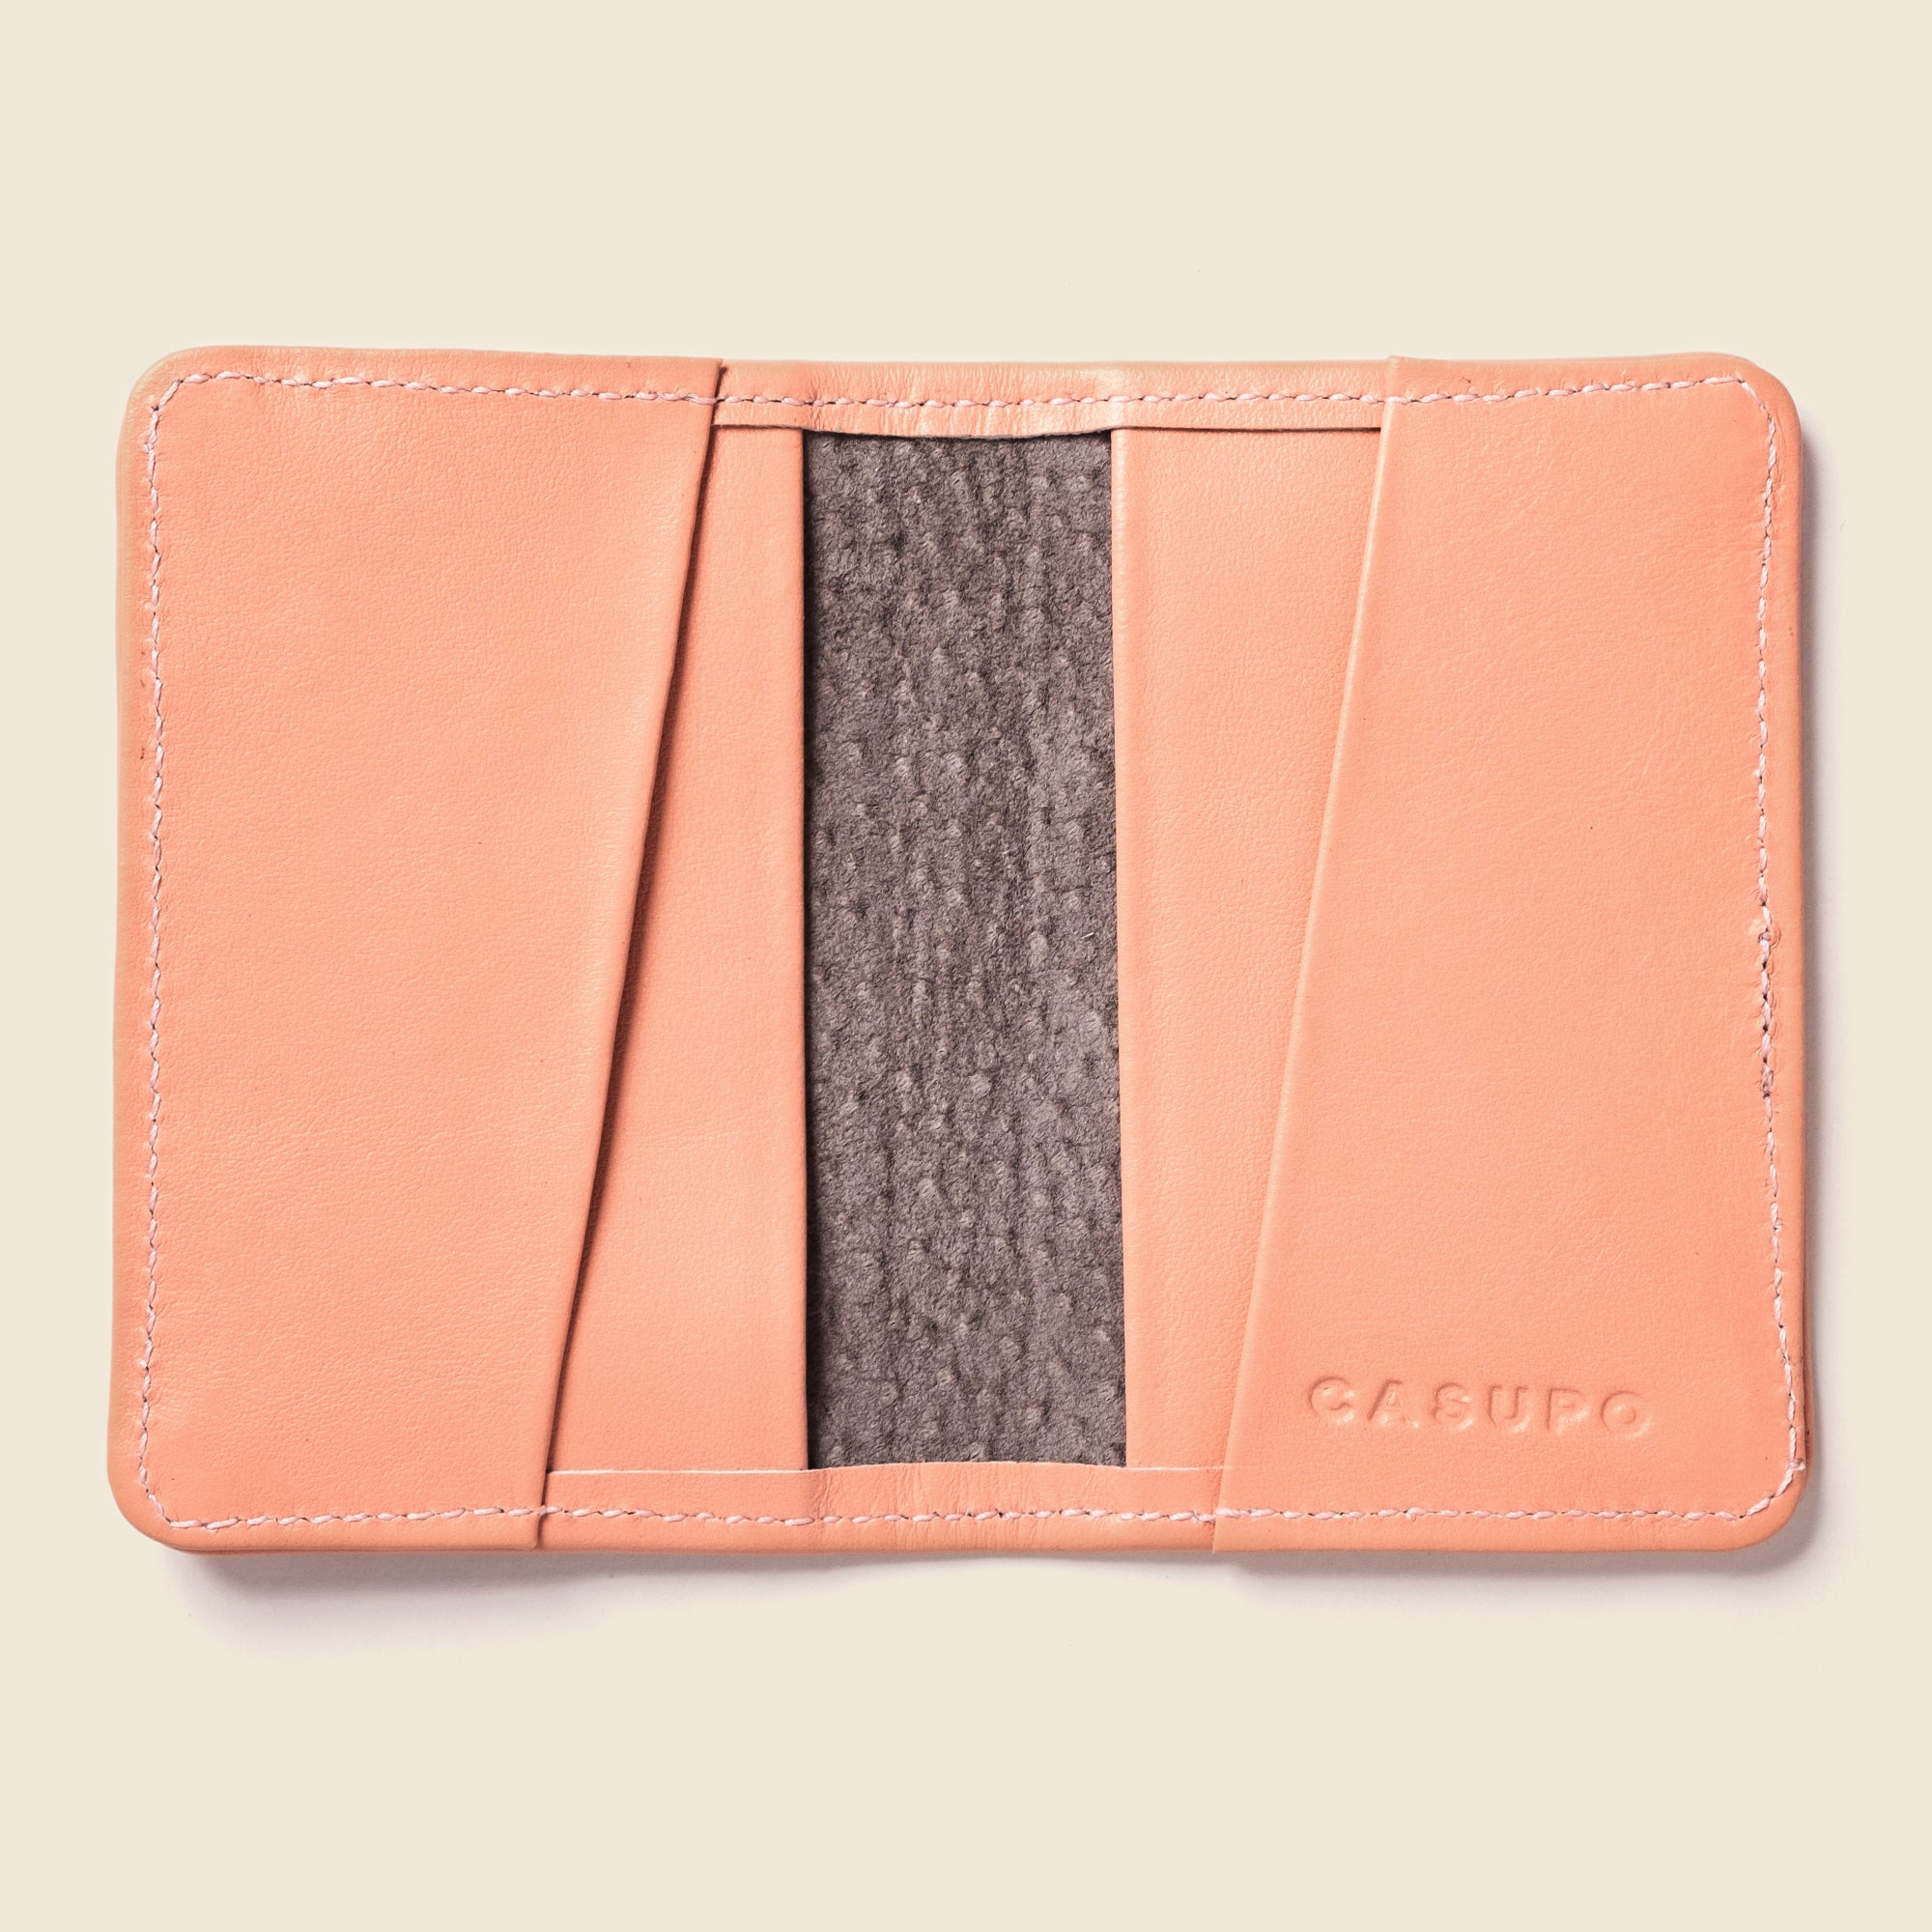 Pastel pink leather bifold wallet for cards and cash